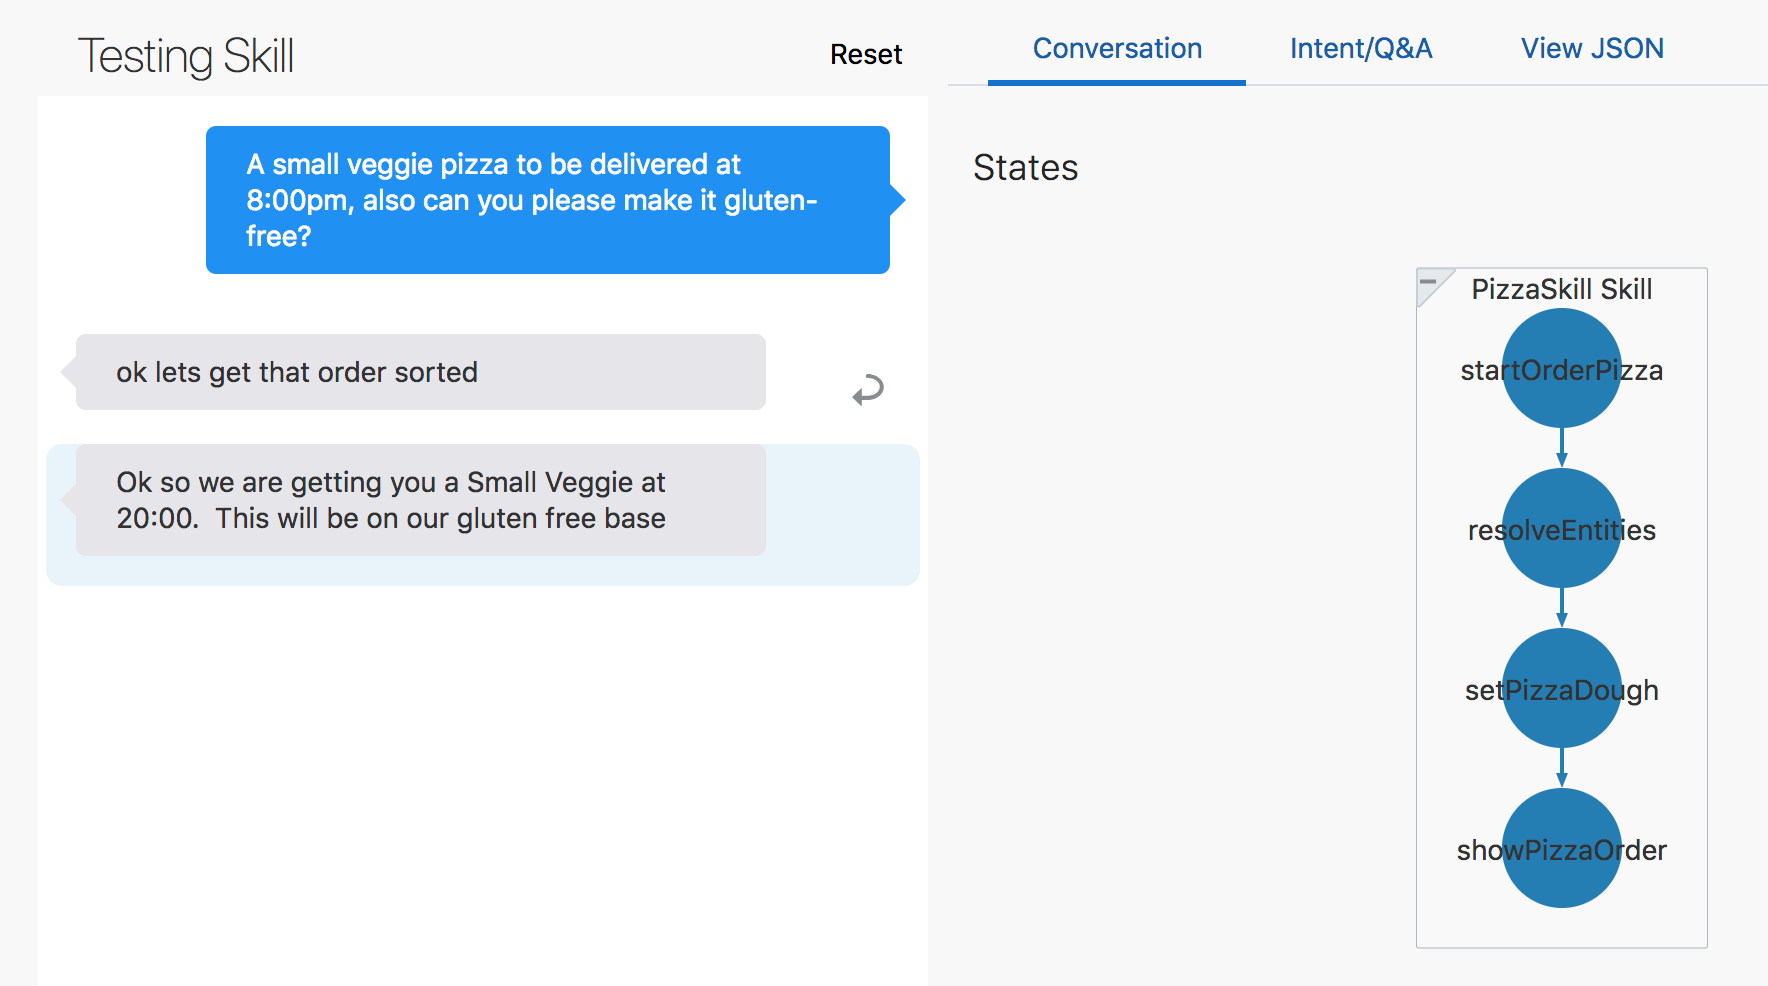 Screenshot of the skill tester. On the left side, there is a conversation between the user and the skill. The response to the user is 'ok let's get that order sorted' and 'Ok, so we're getting you a Small Veggie at 20:00. This will be on our gluten free base.' 